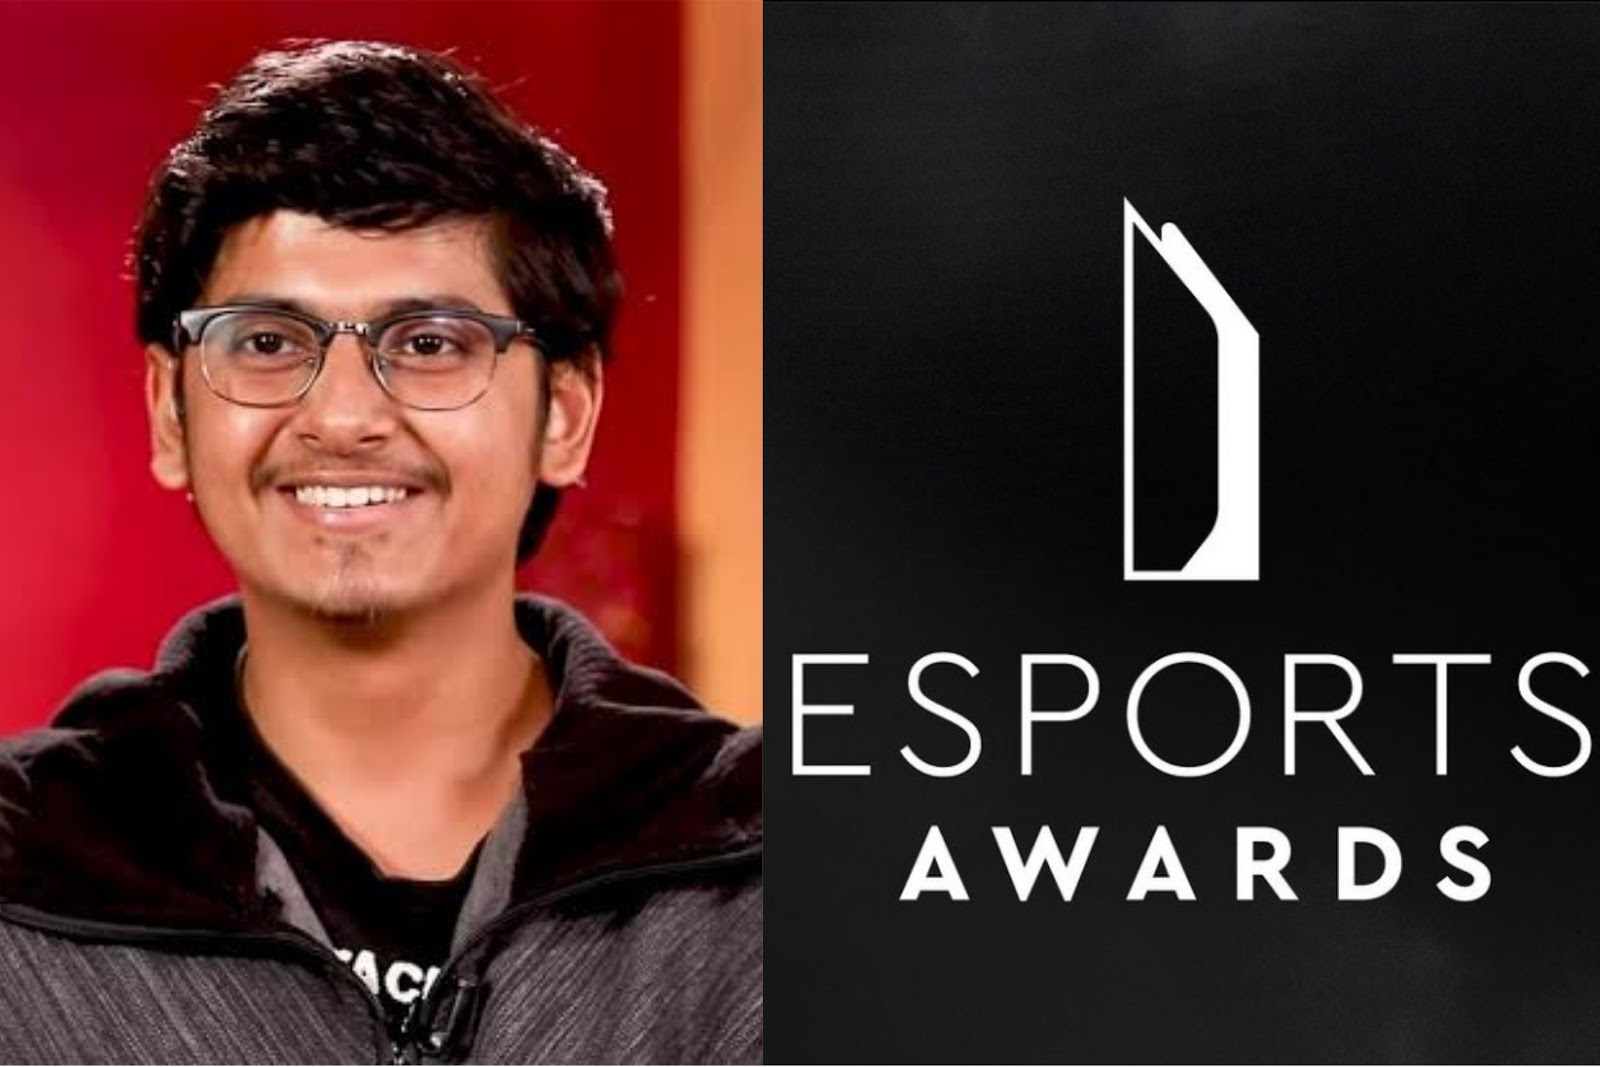 Esports Awards 2021: MortaL Nominated As a Finalist For The ‘Streamer of the Year’ | Esports | Mobile Esports | Esports Awards | IG MortaL